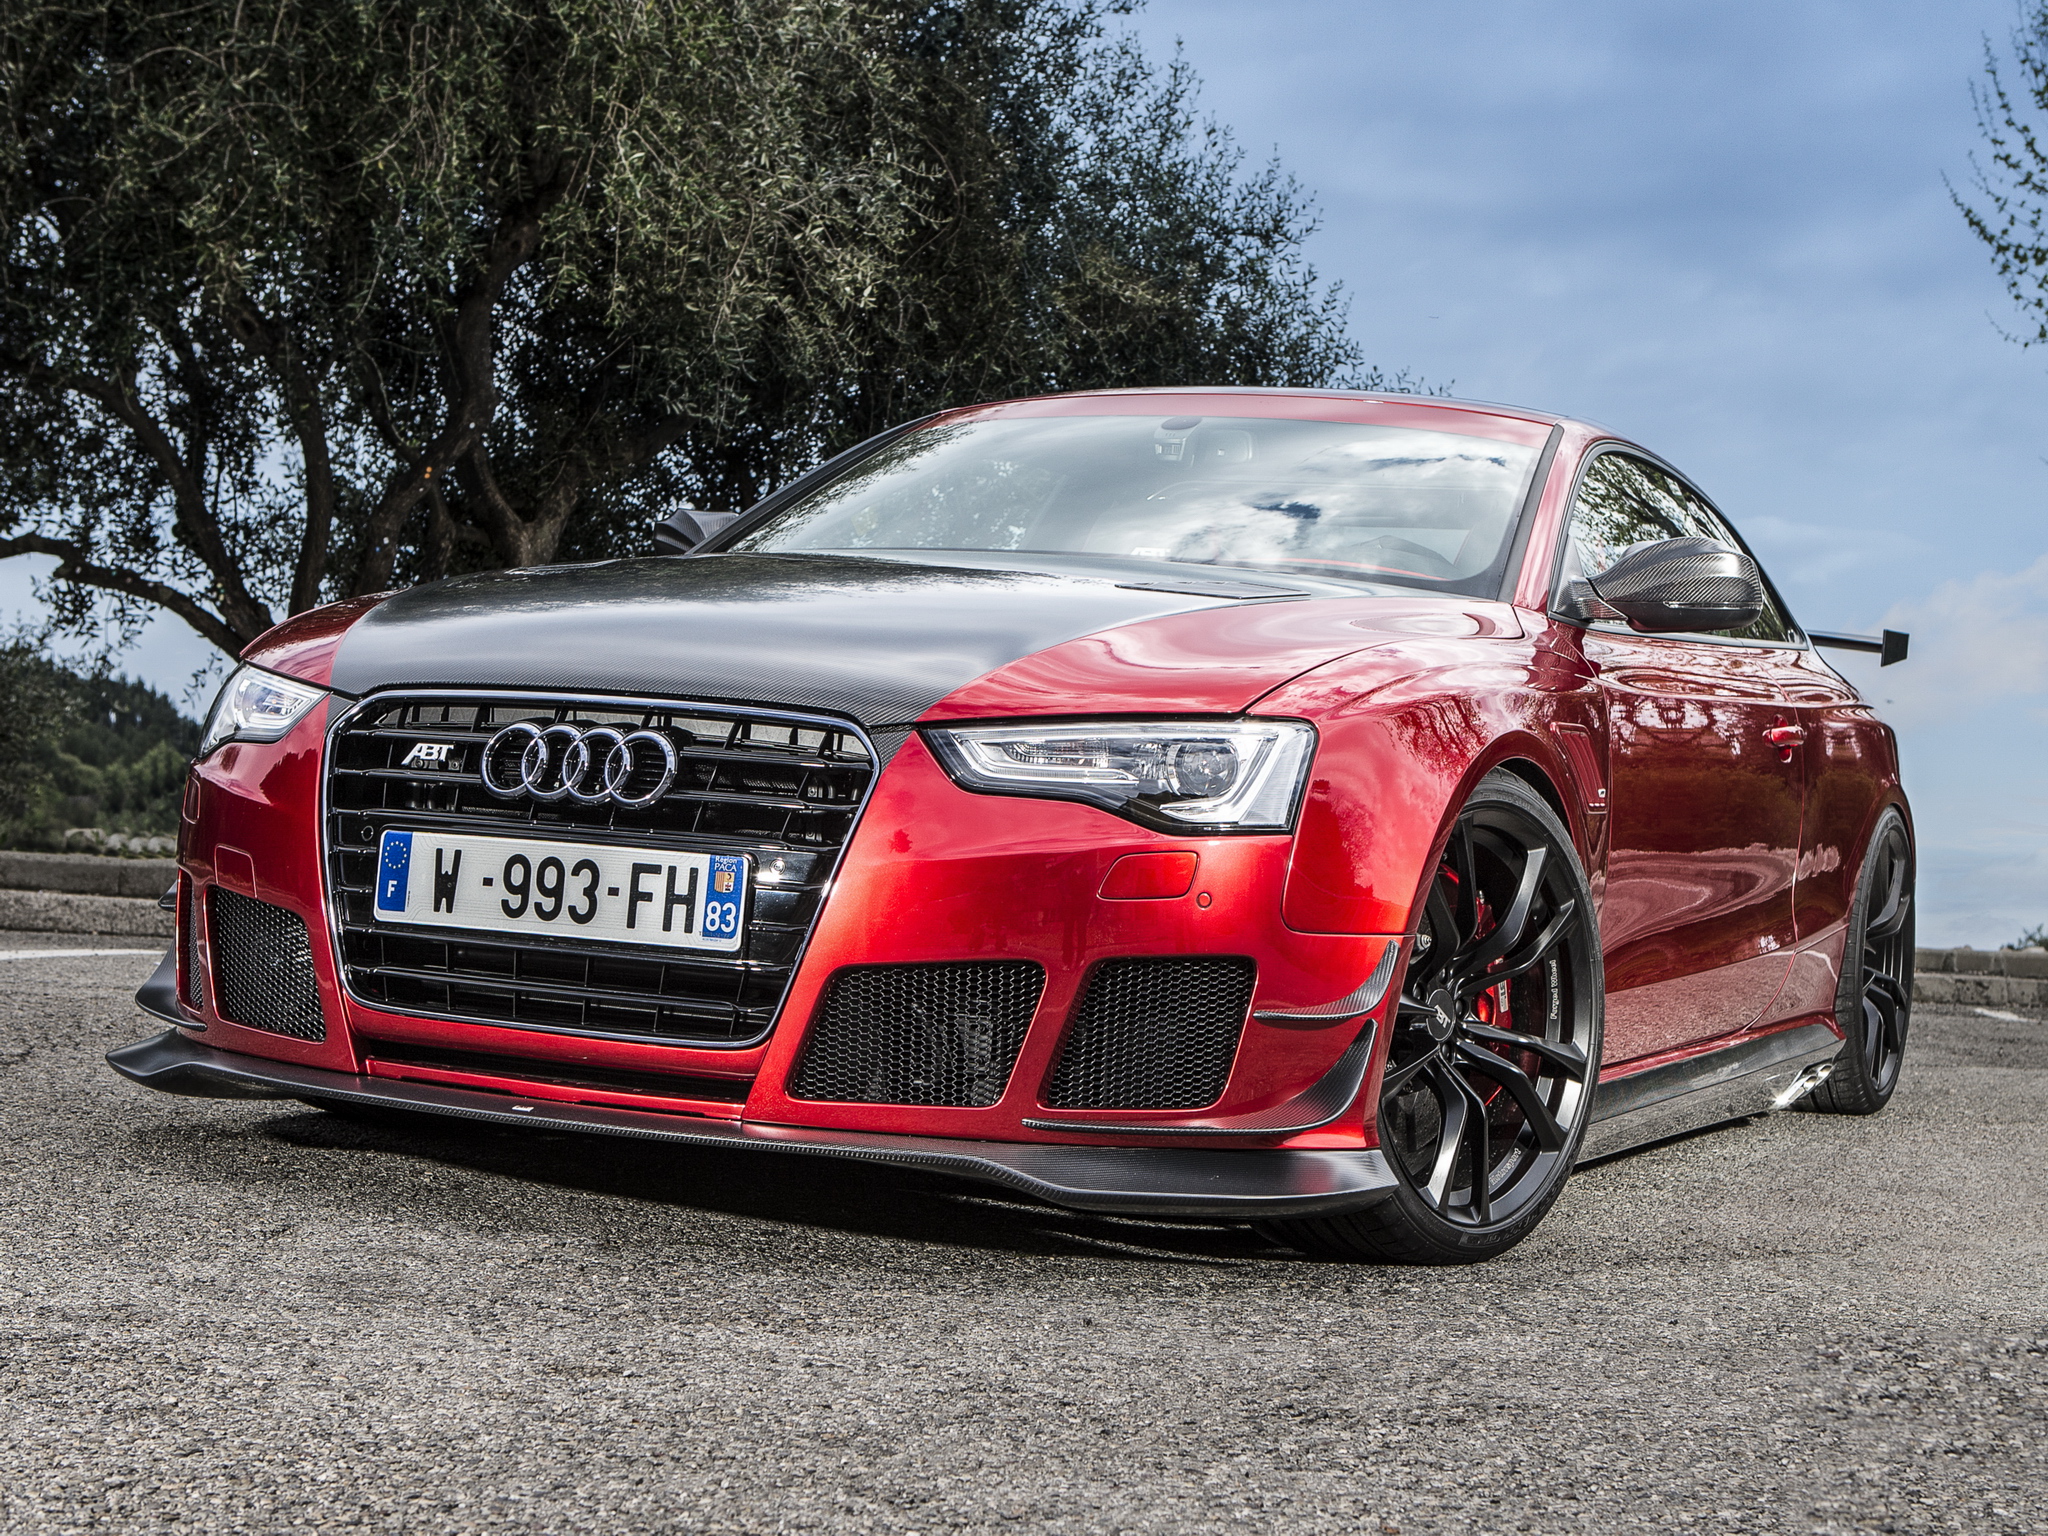 2014, Abt, Audi, Rs5 r, Coupe, Tuning, R55 Wallpaper